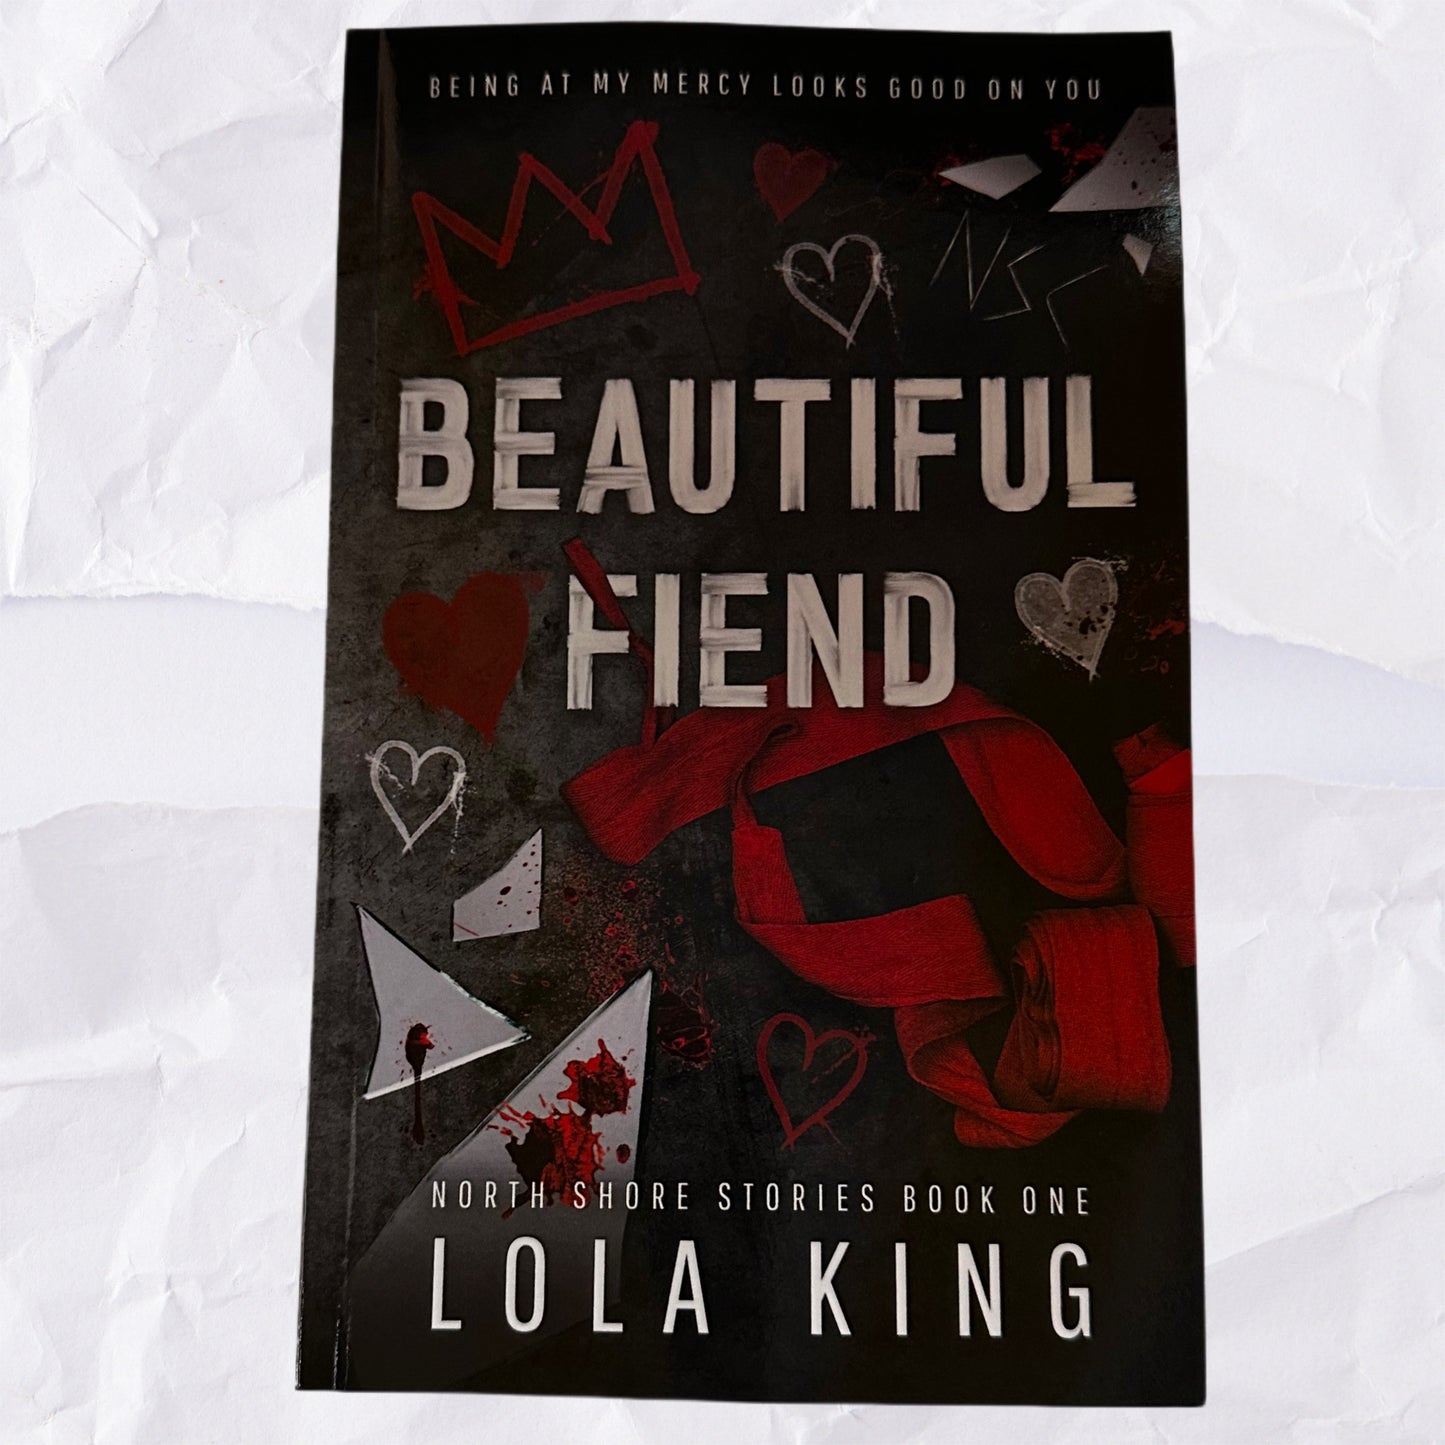 Beautiful Fiend (North Shore Stories #1) by Lola King